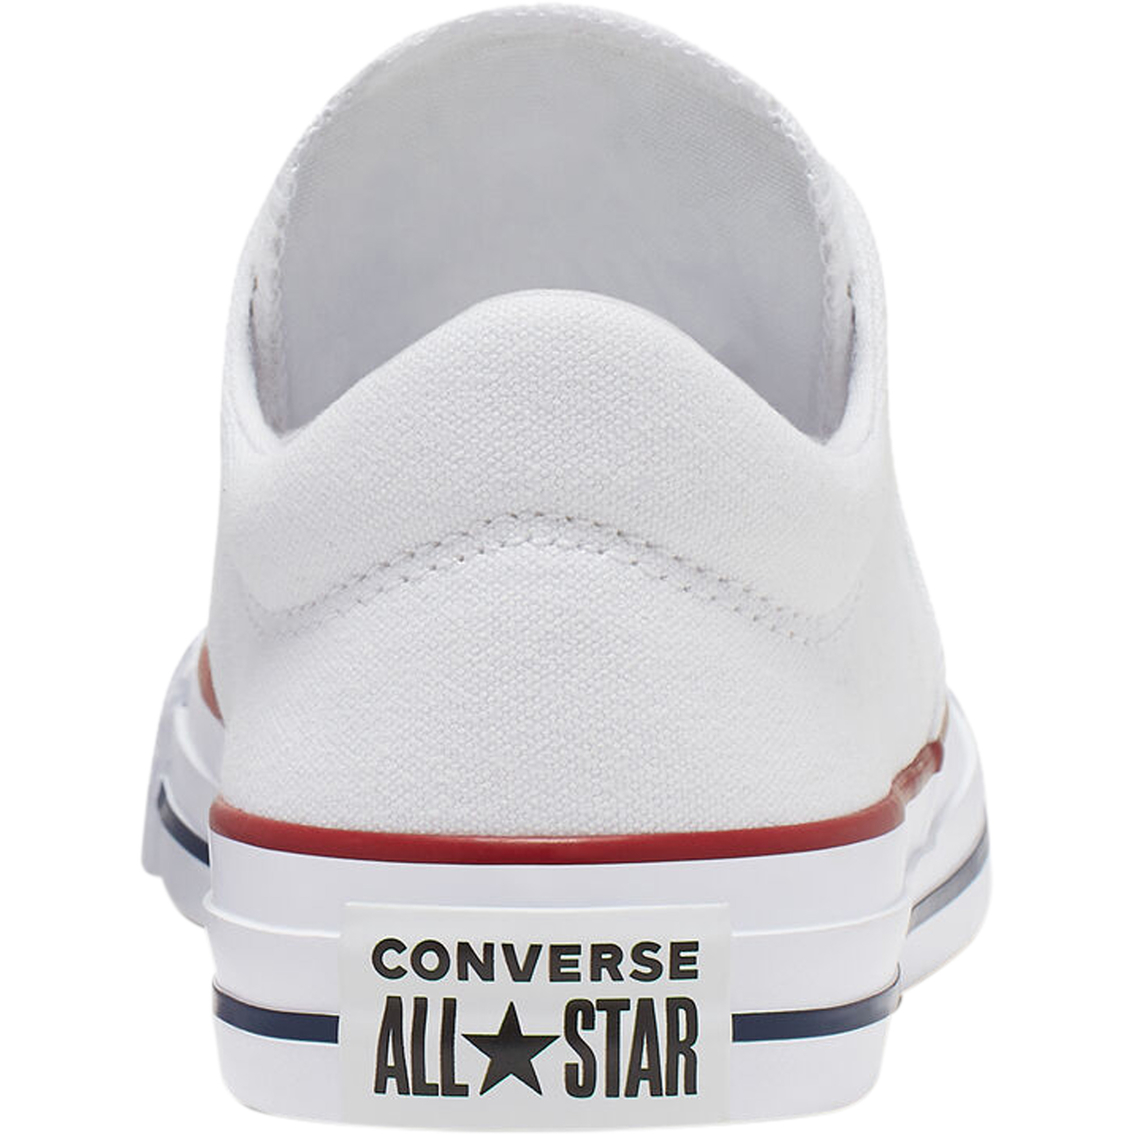 Converse Women's Chuck Taylor All Star Madison Low Top Sneakers - Image 4 of 7